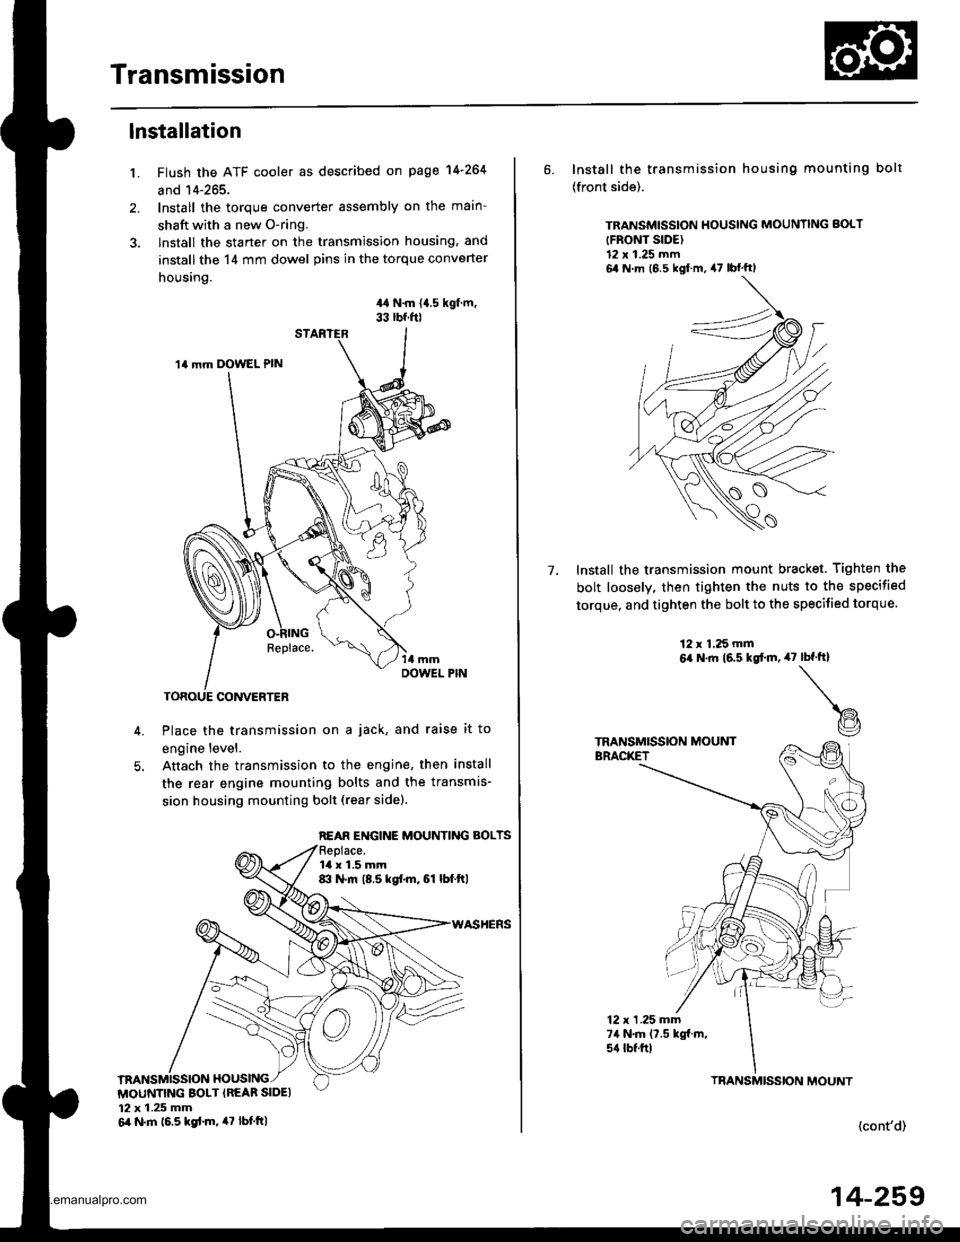 HONDA CR-V 1999 RD1-RD3 / 1.G Service Manual 
Transmission
1.
lnstallation
Flush the ATF cooler as described on page 14-264
and 14-265.
Install the torque converter assembly on the main-
shaft with a new O-ring.
lnstall the starter on the transm